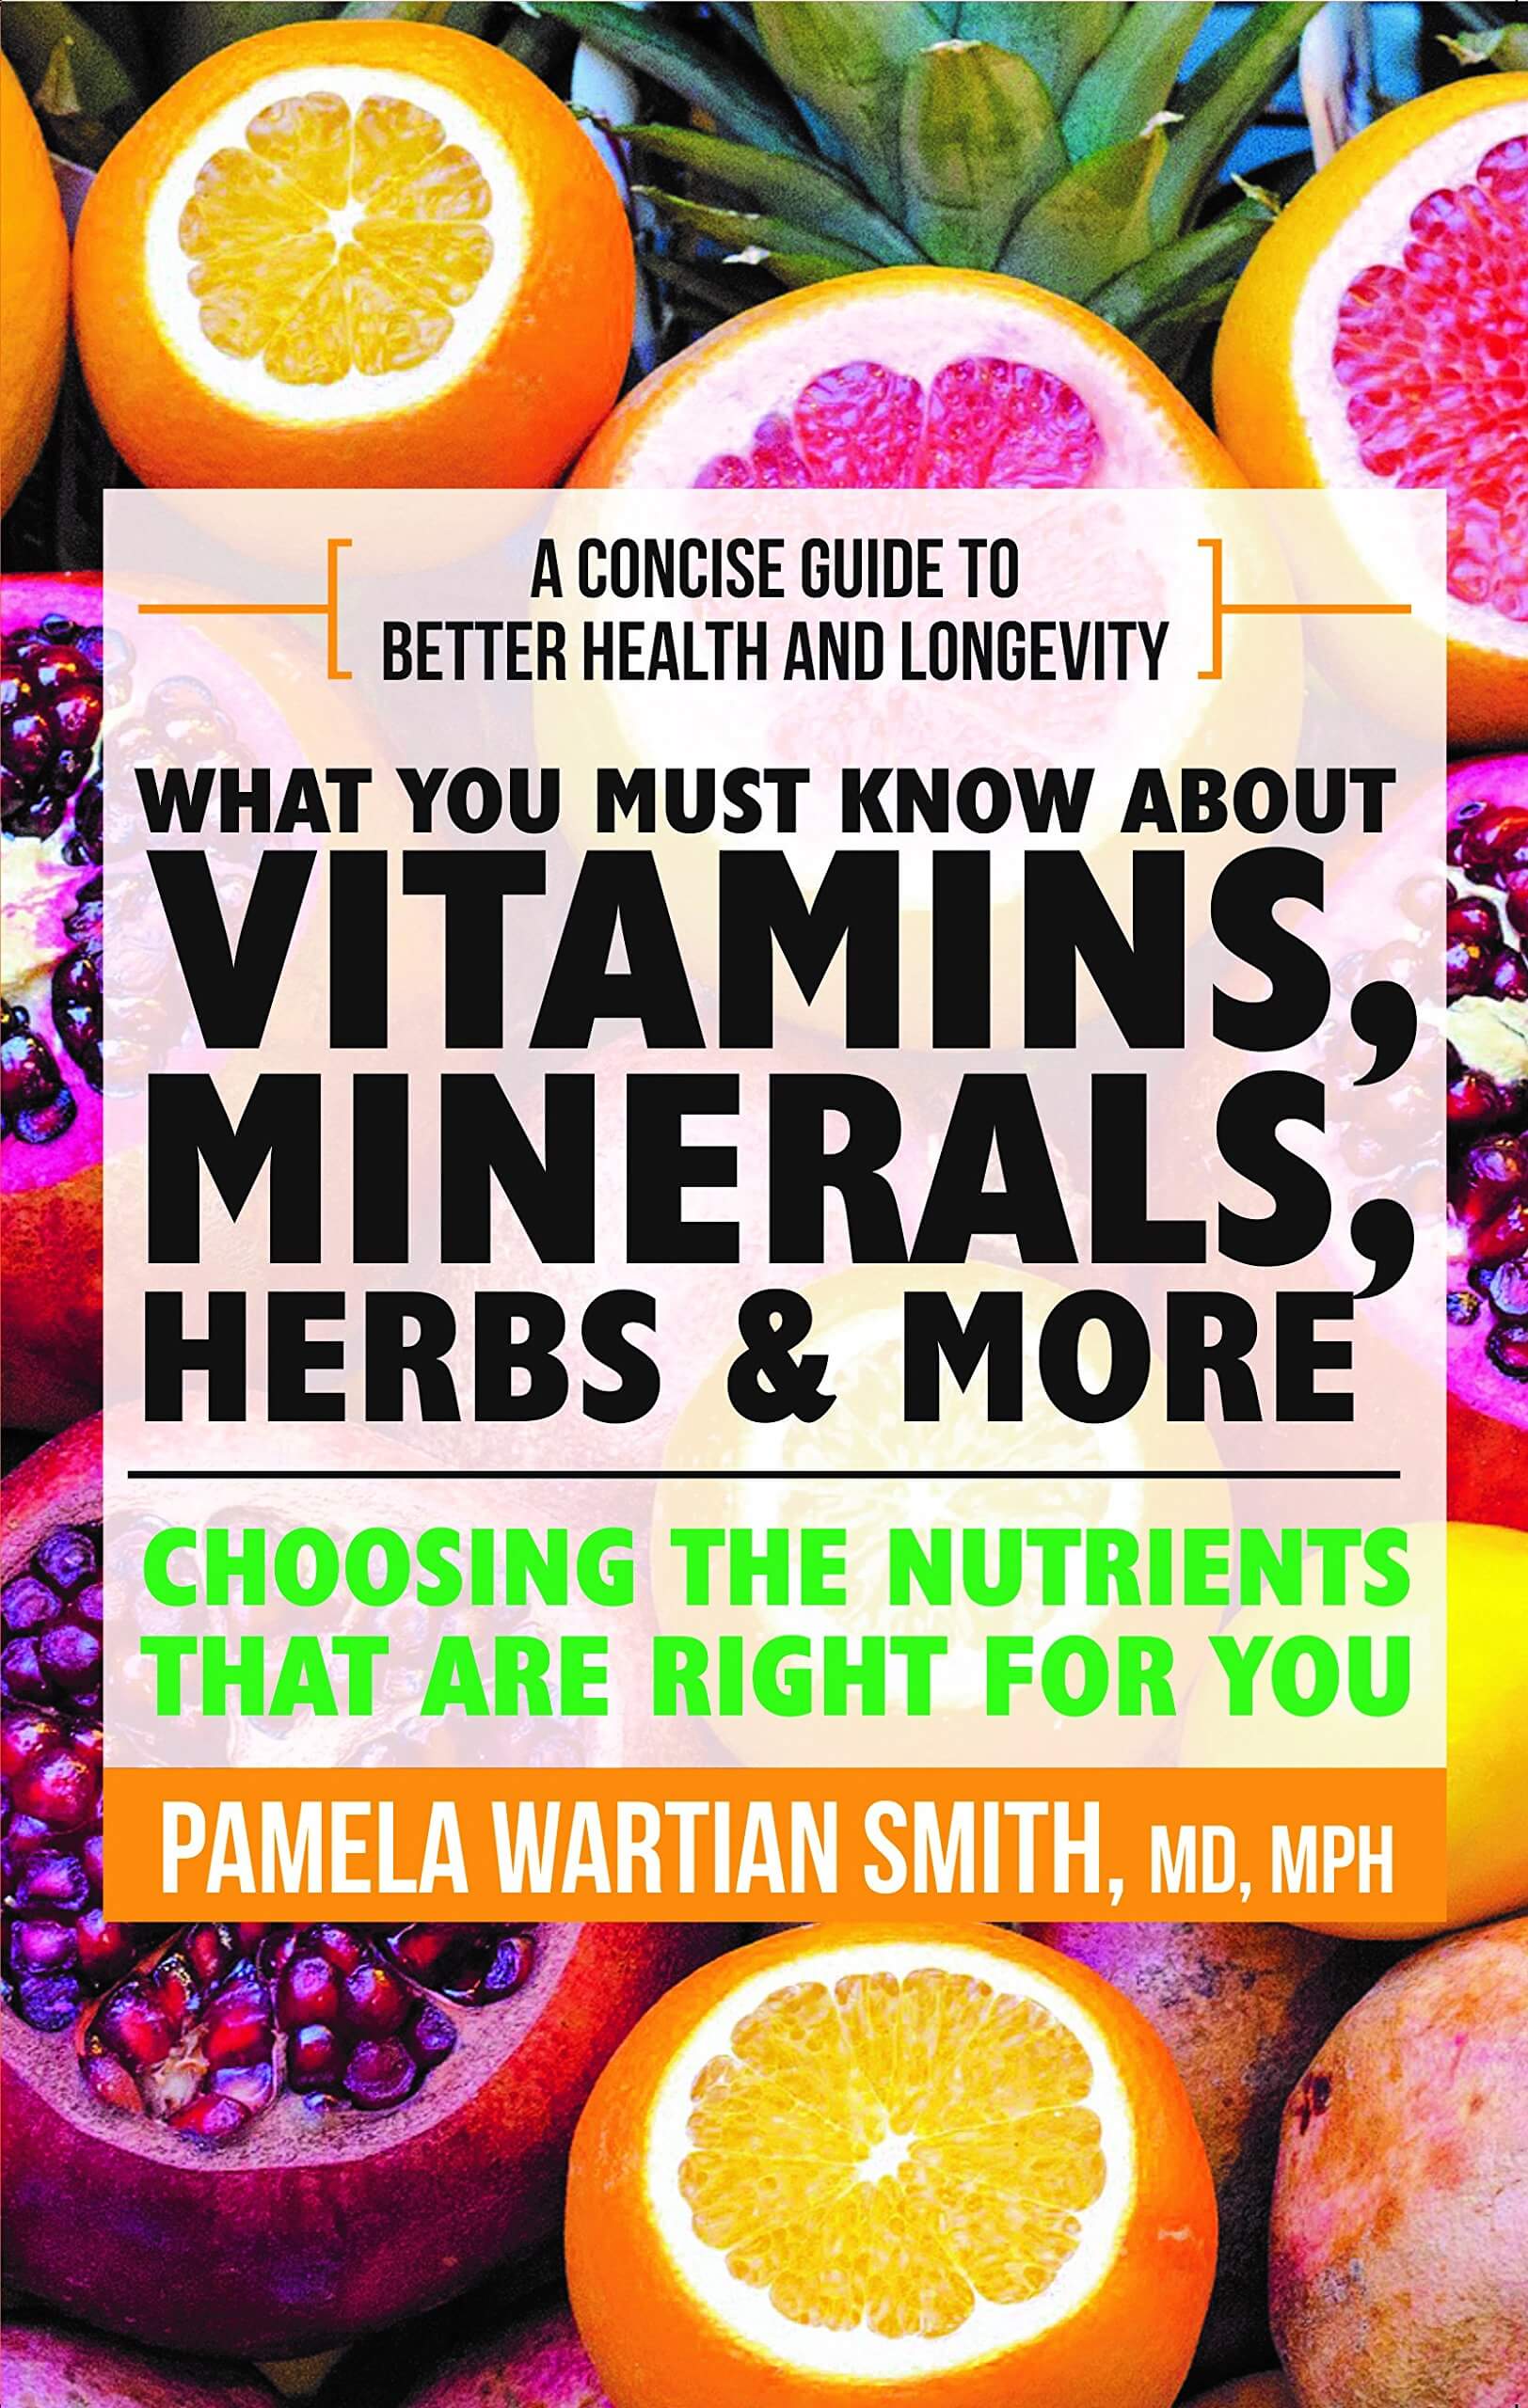 What you must know about vitamins, minerals and herbs